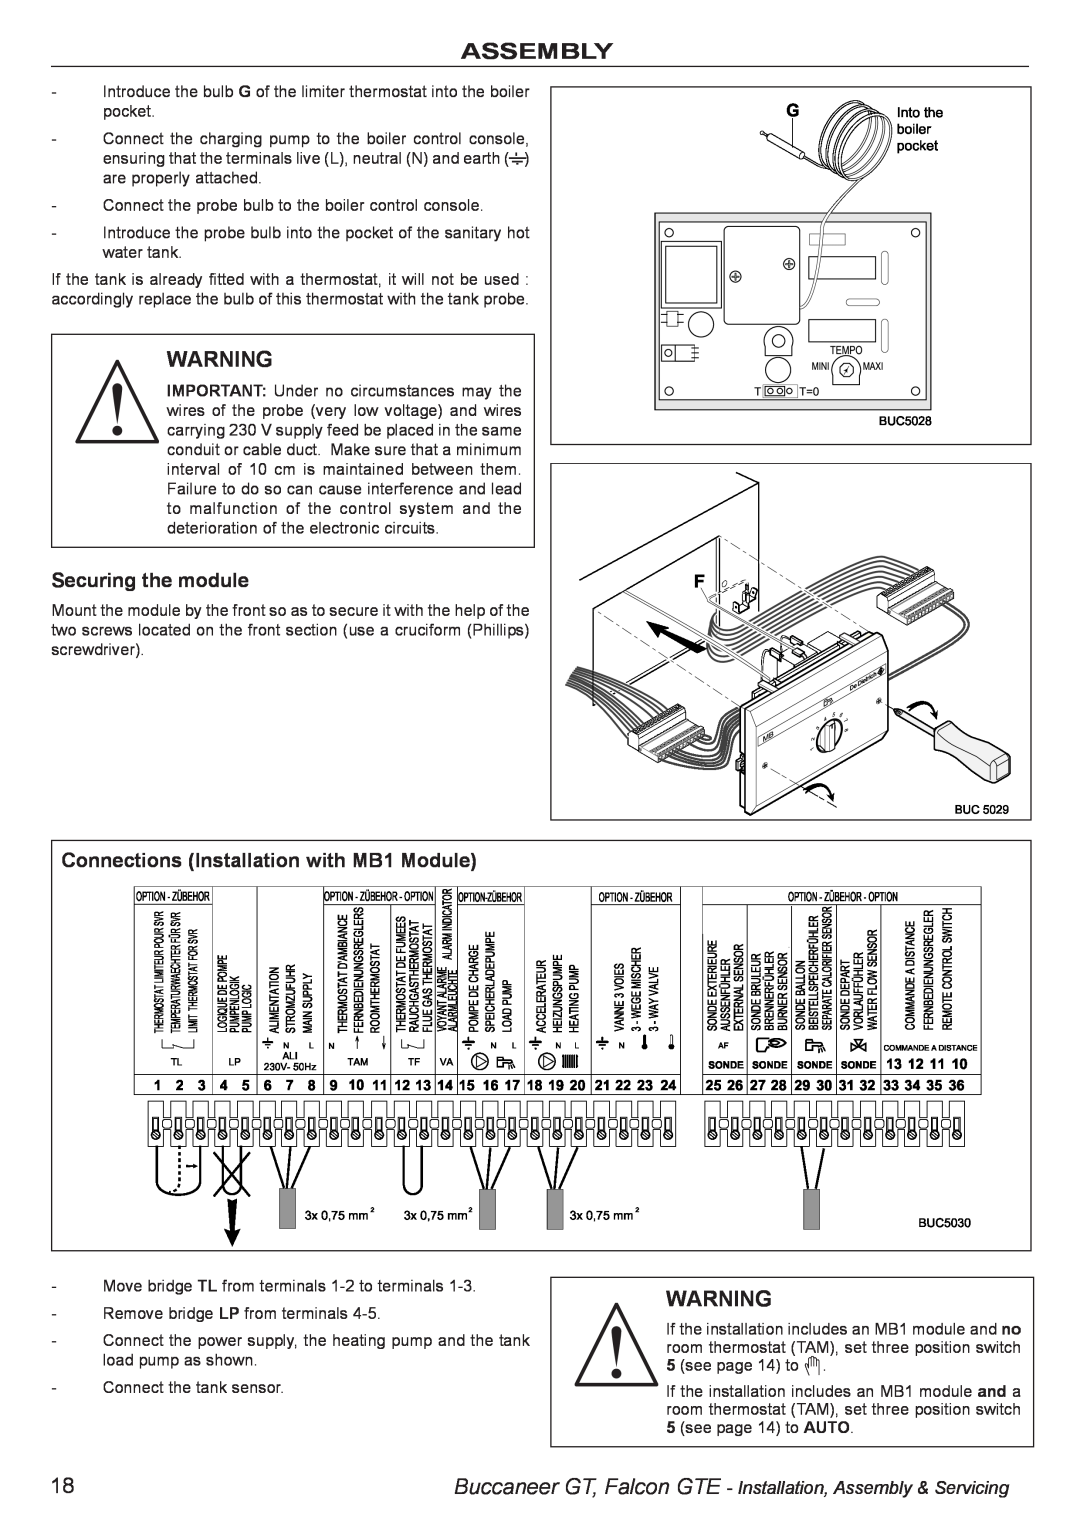 IDEAL INDUSTRIES BUC5034 manual Securing the module, Connections Installation with MB1 Module, #$%% #$%%, Assembly 